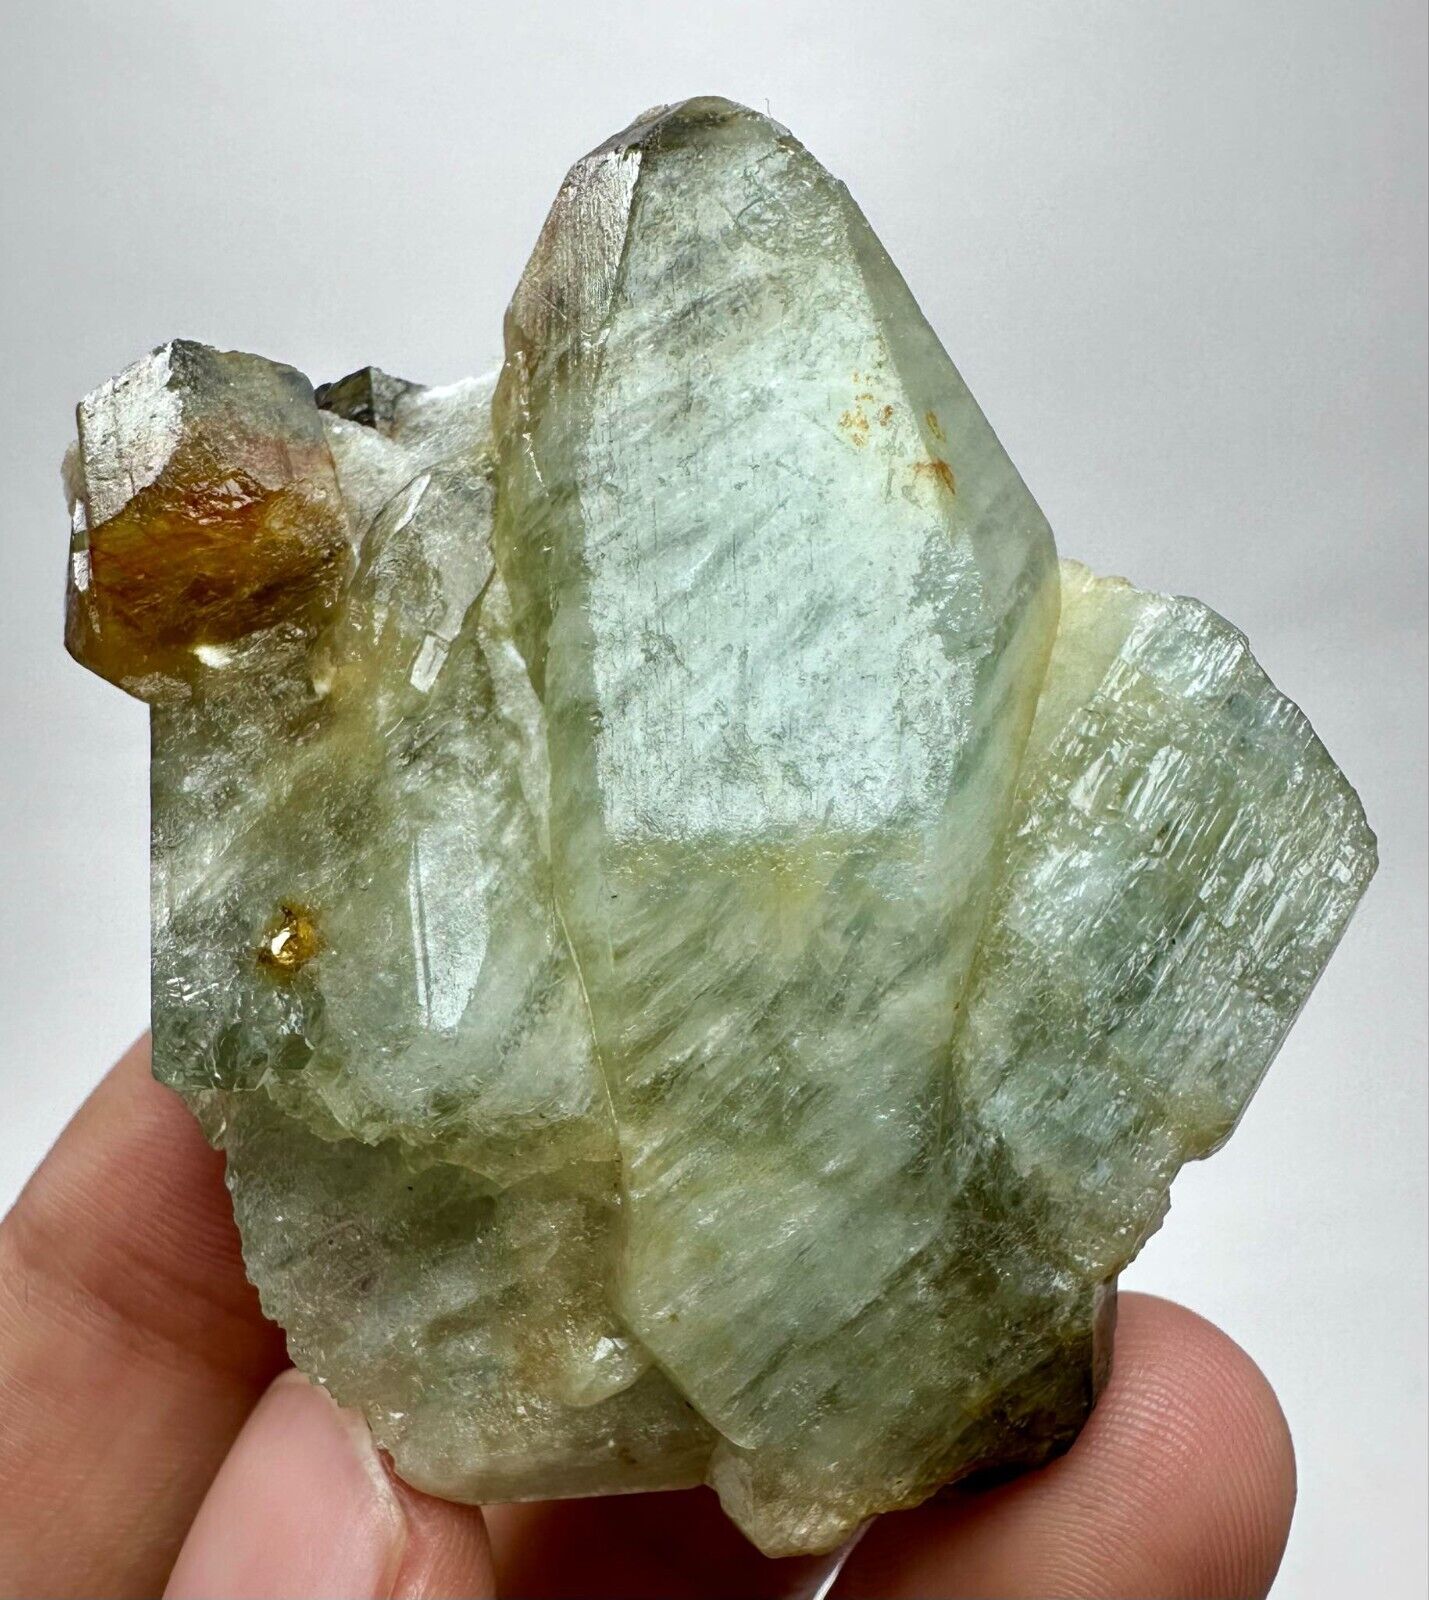 352 Ct Wow Amazing Top Florescent Afghanite Huge Tri Crystals From @AFG